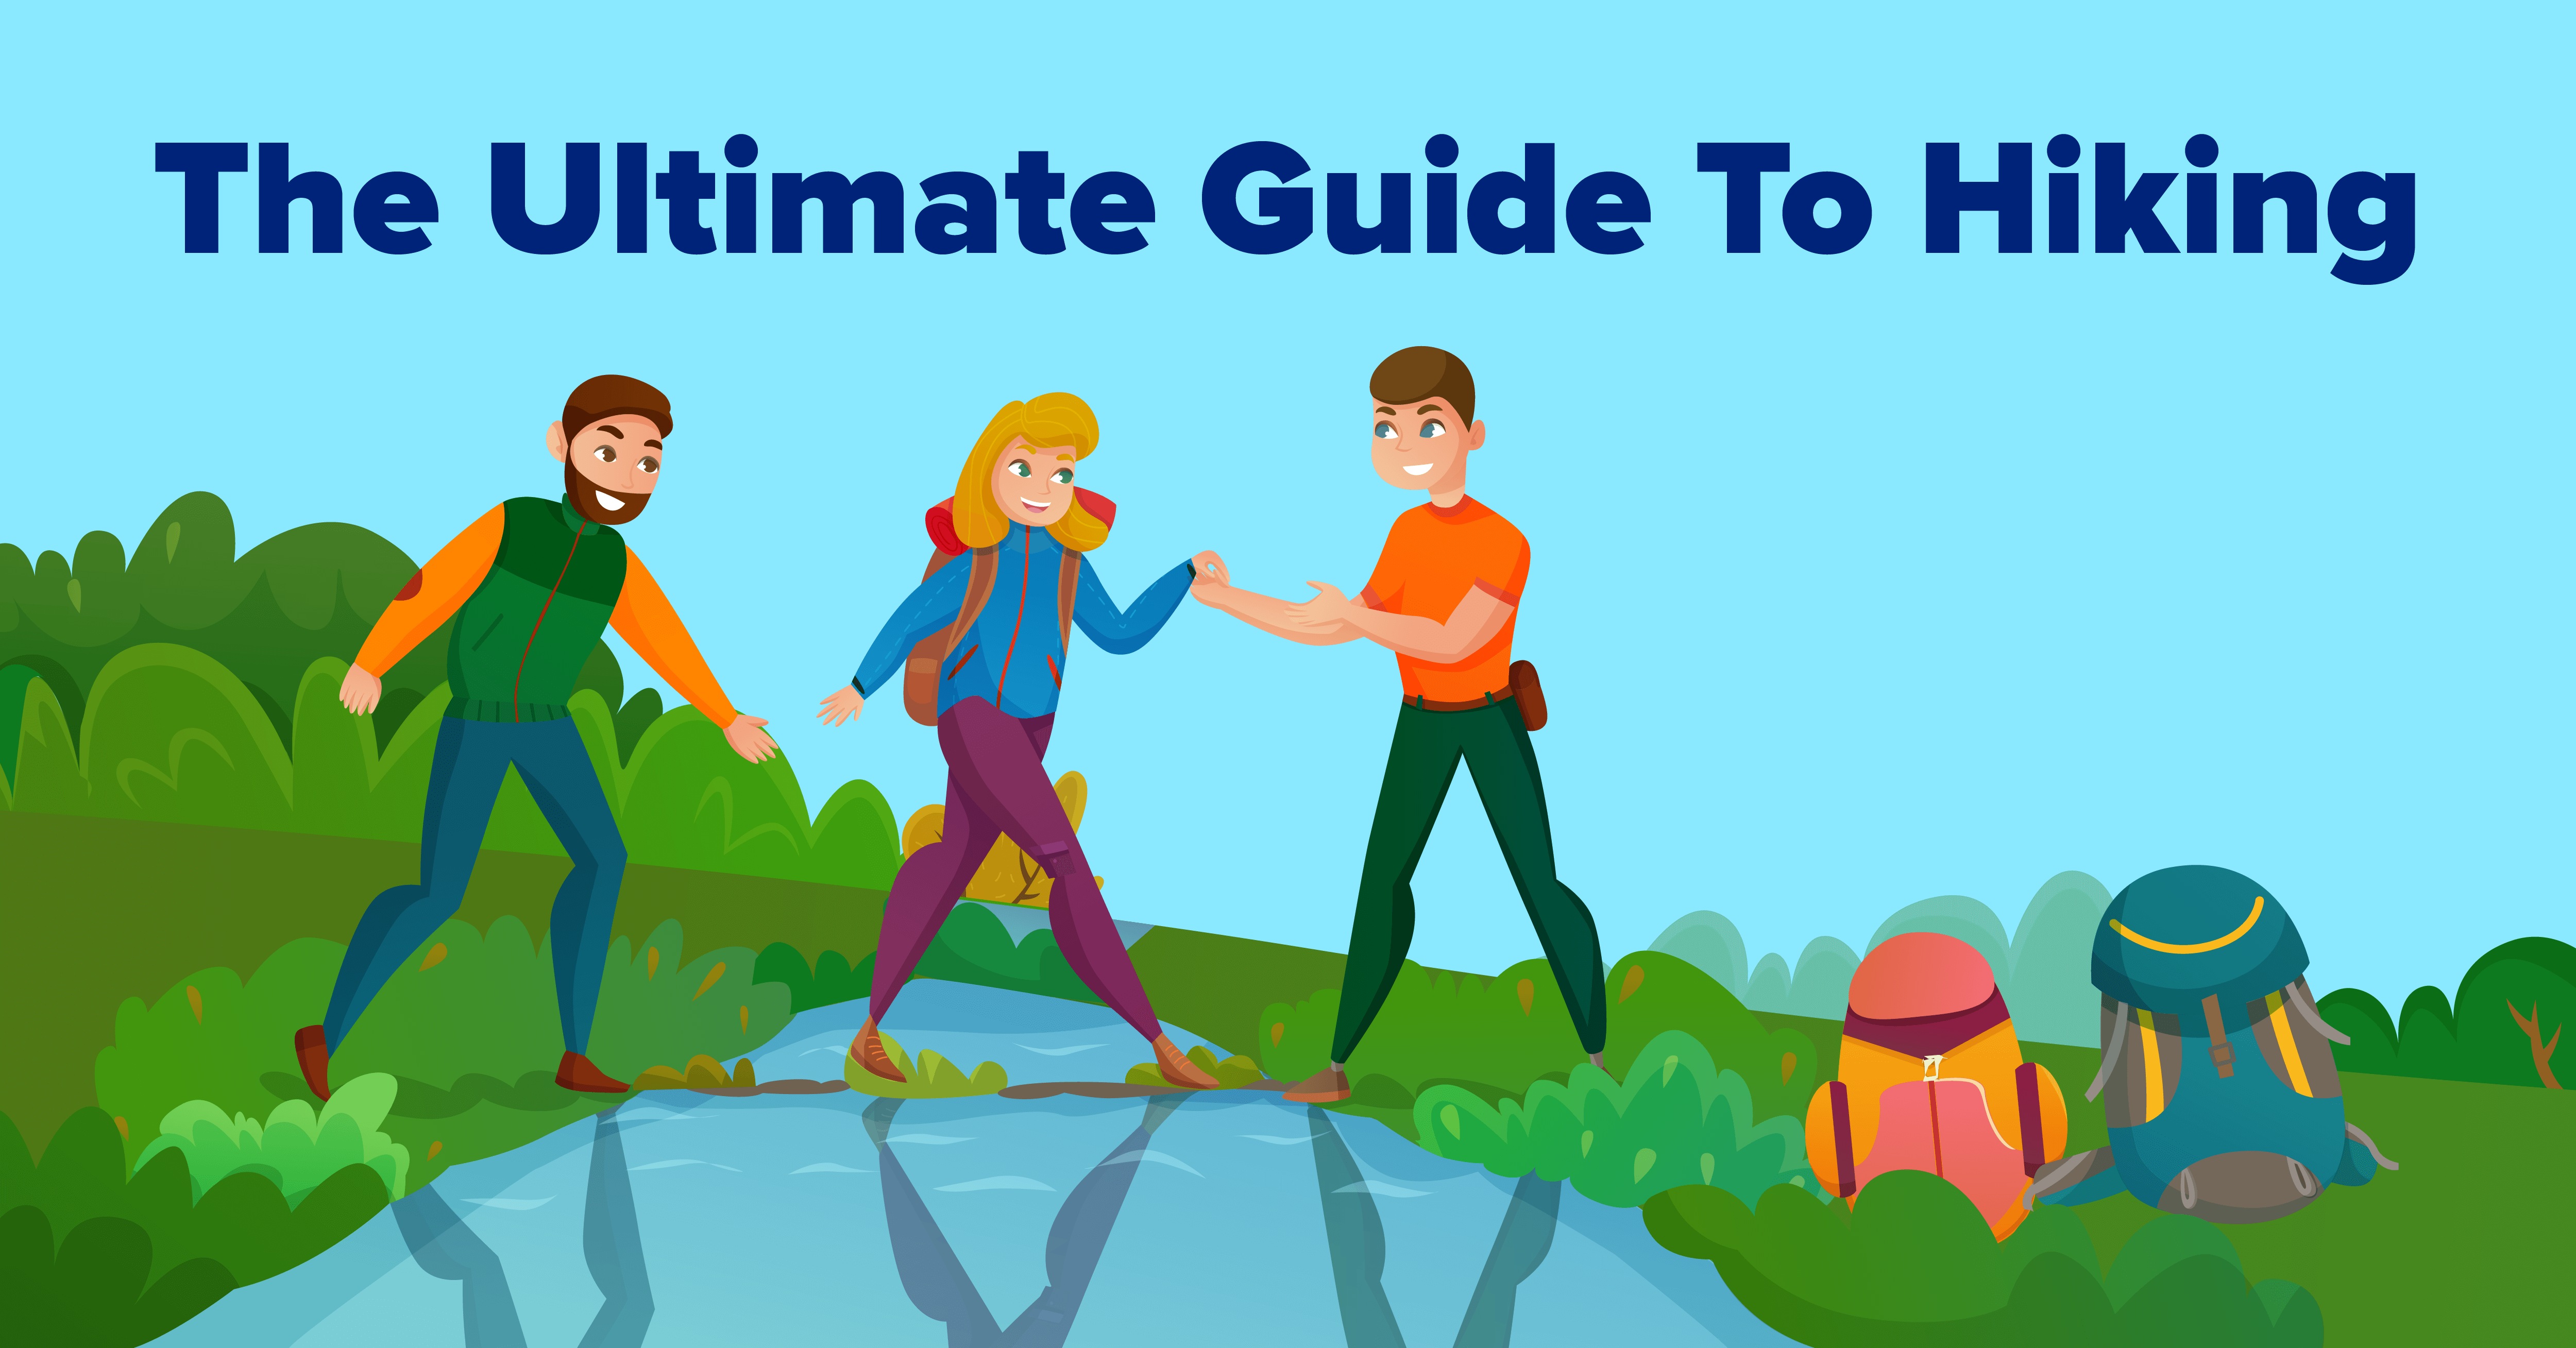 The Ultimate Guide To Hiking